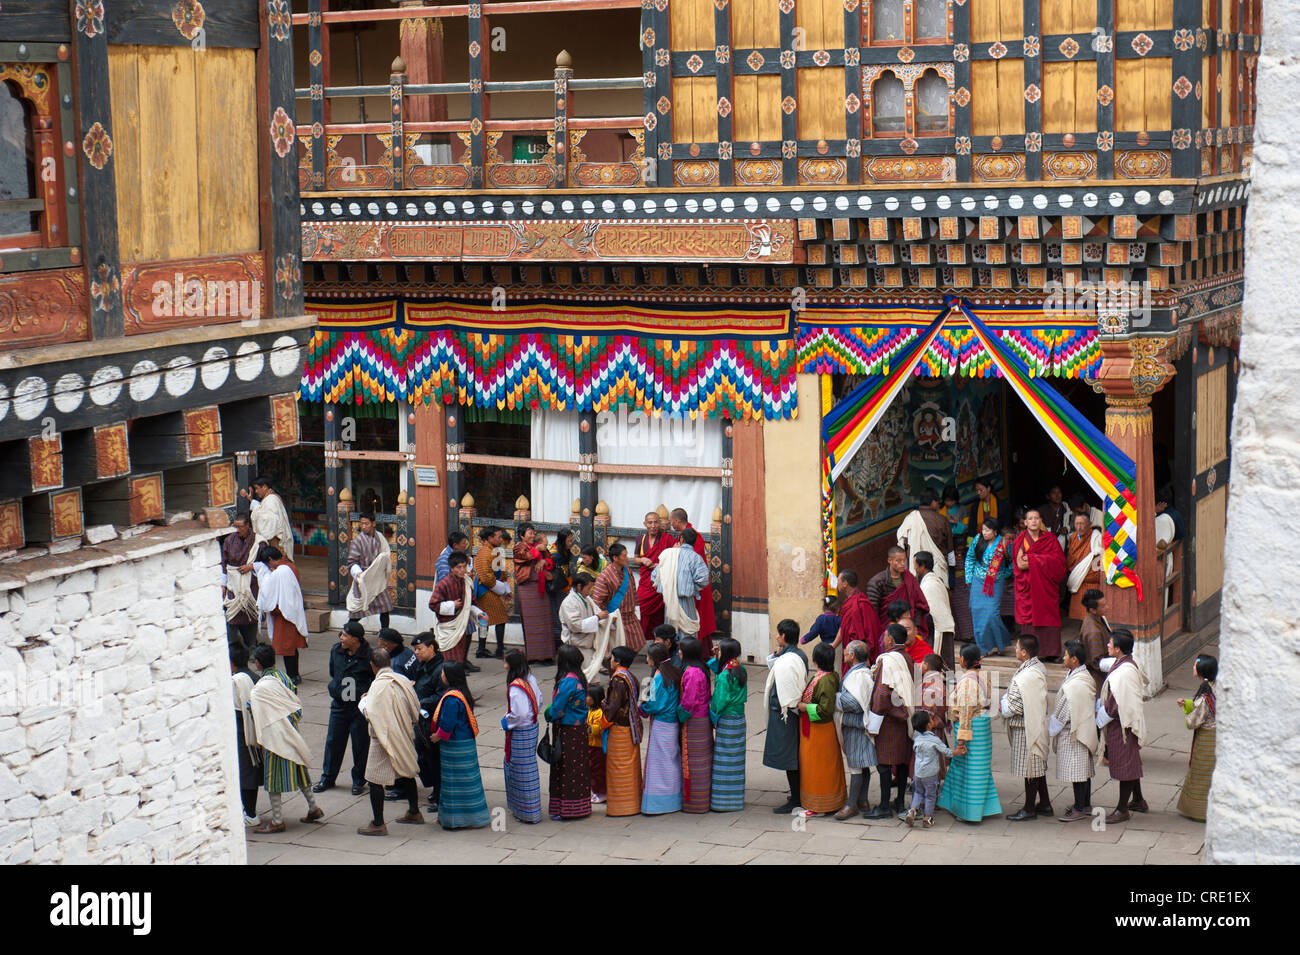 Tibetan Buddhist festival, people wearing the traditional Gho robe standing in a queue, Rinpung Dzong Monastery and Fortress Stock Photo